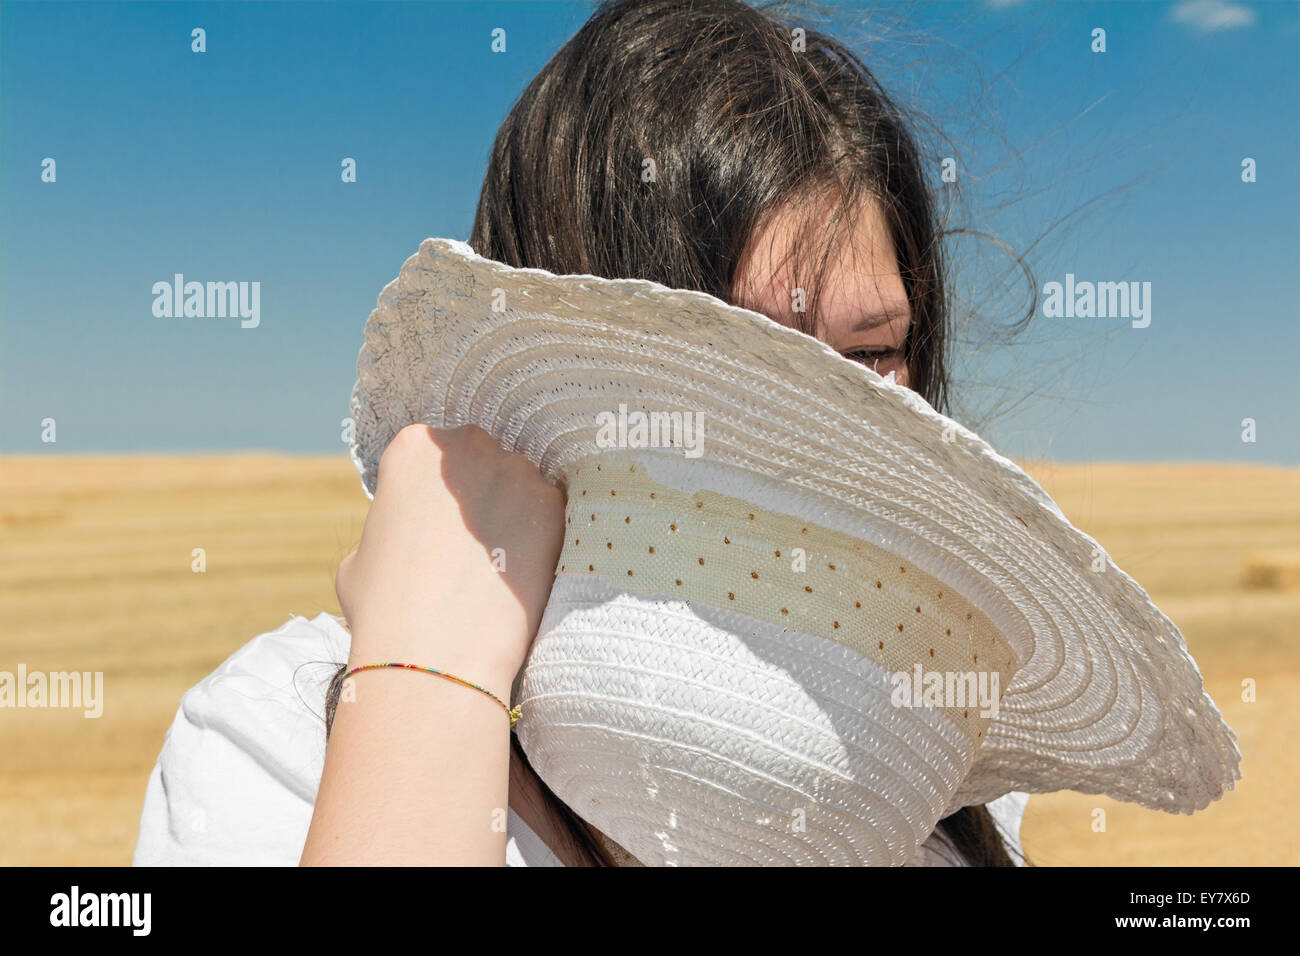 girl with white hat in hand in wheat field Stock Photo